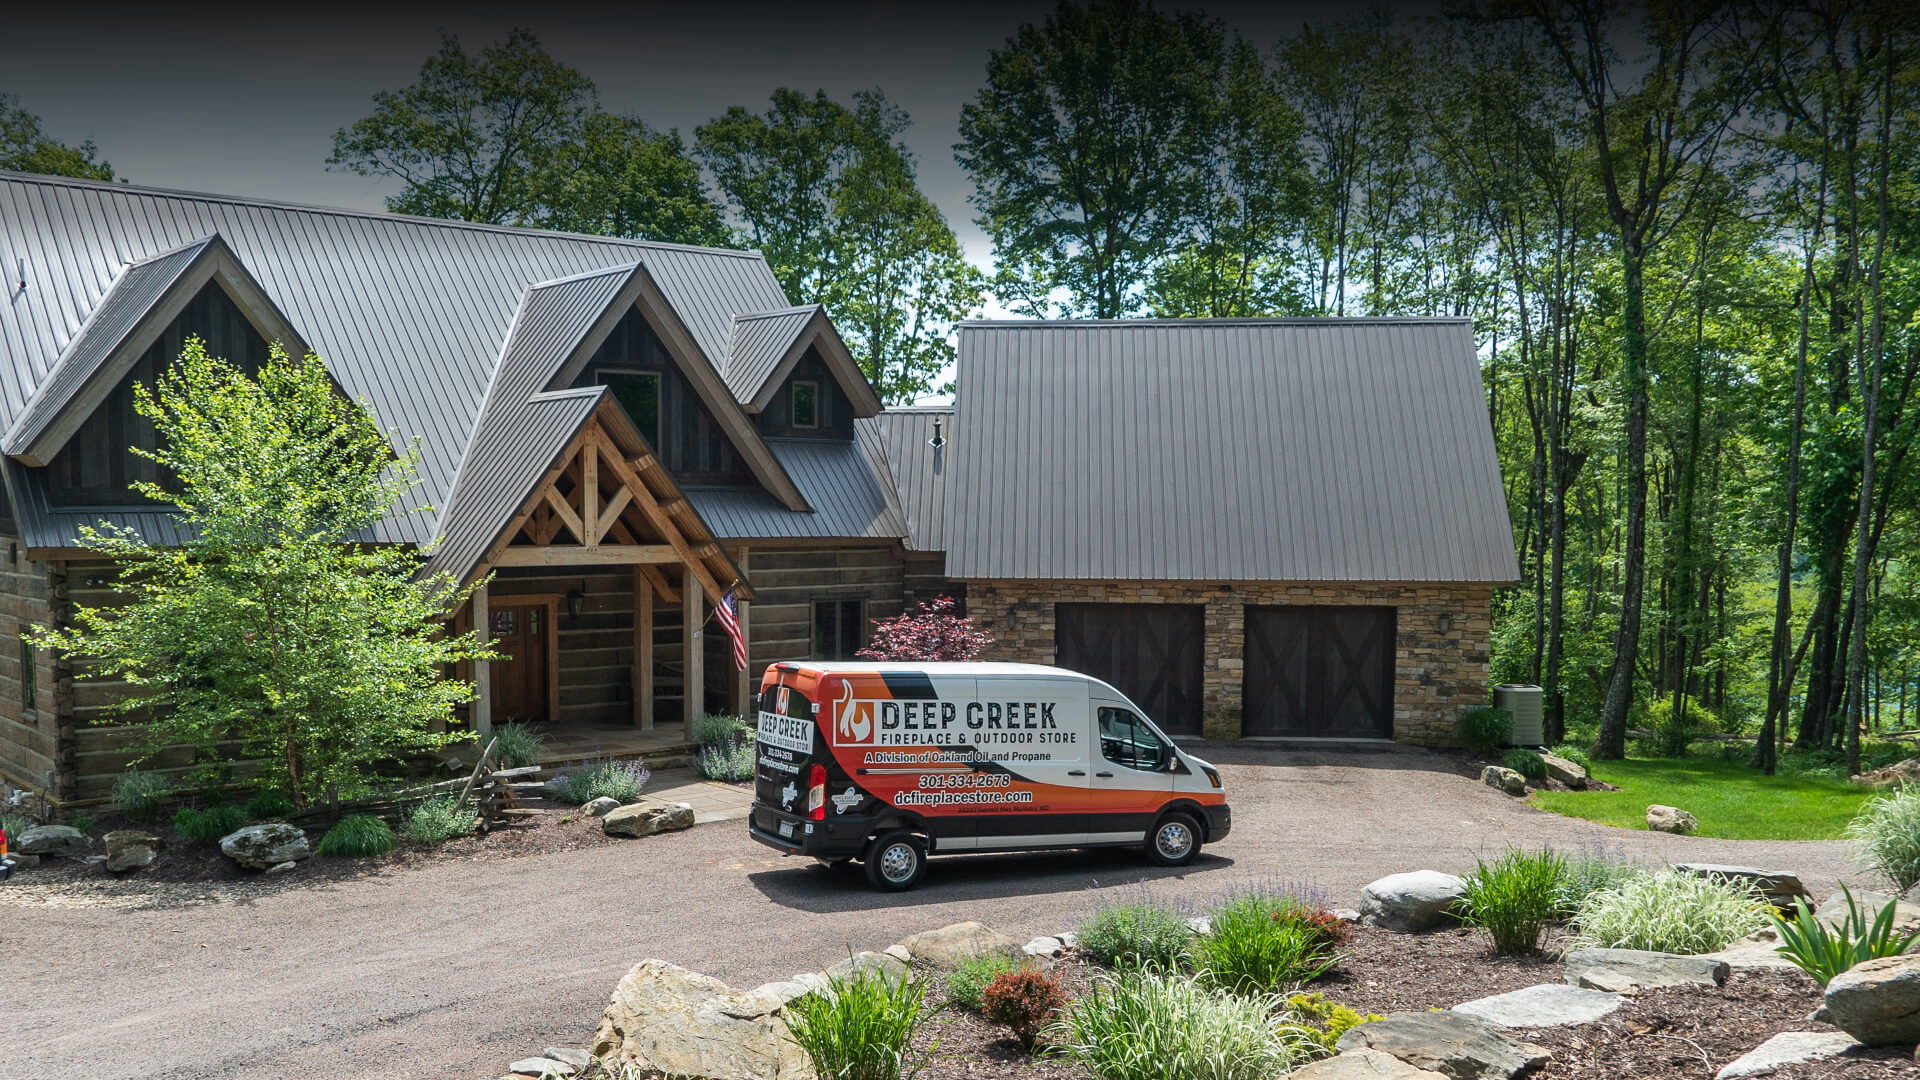 Deep Creek Fireplace and Outdoor Store Van Parked in front of a home.